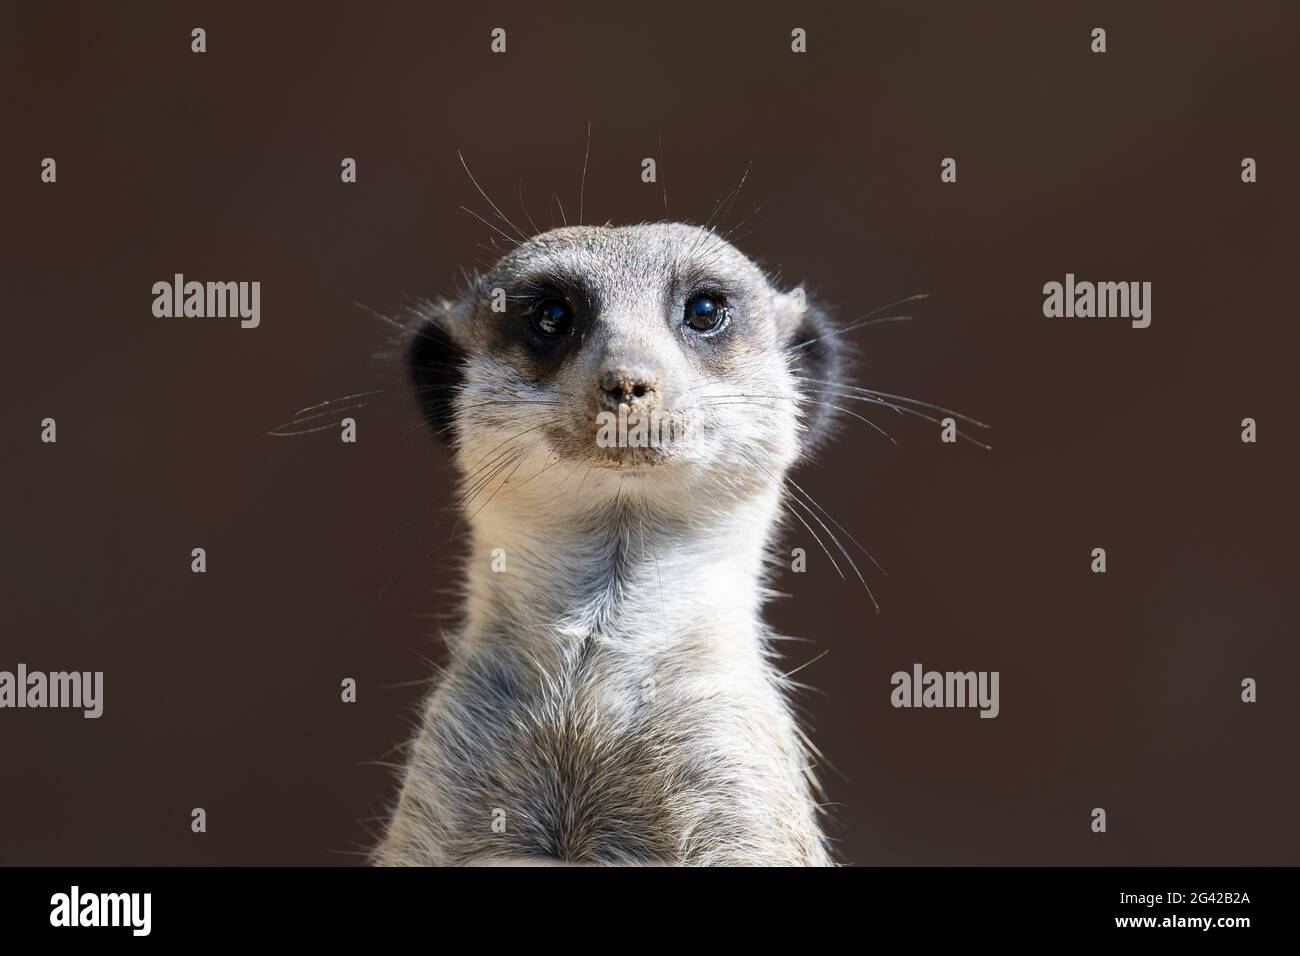 Front view of a Meerkat standing upright Stock Photo